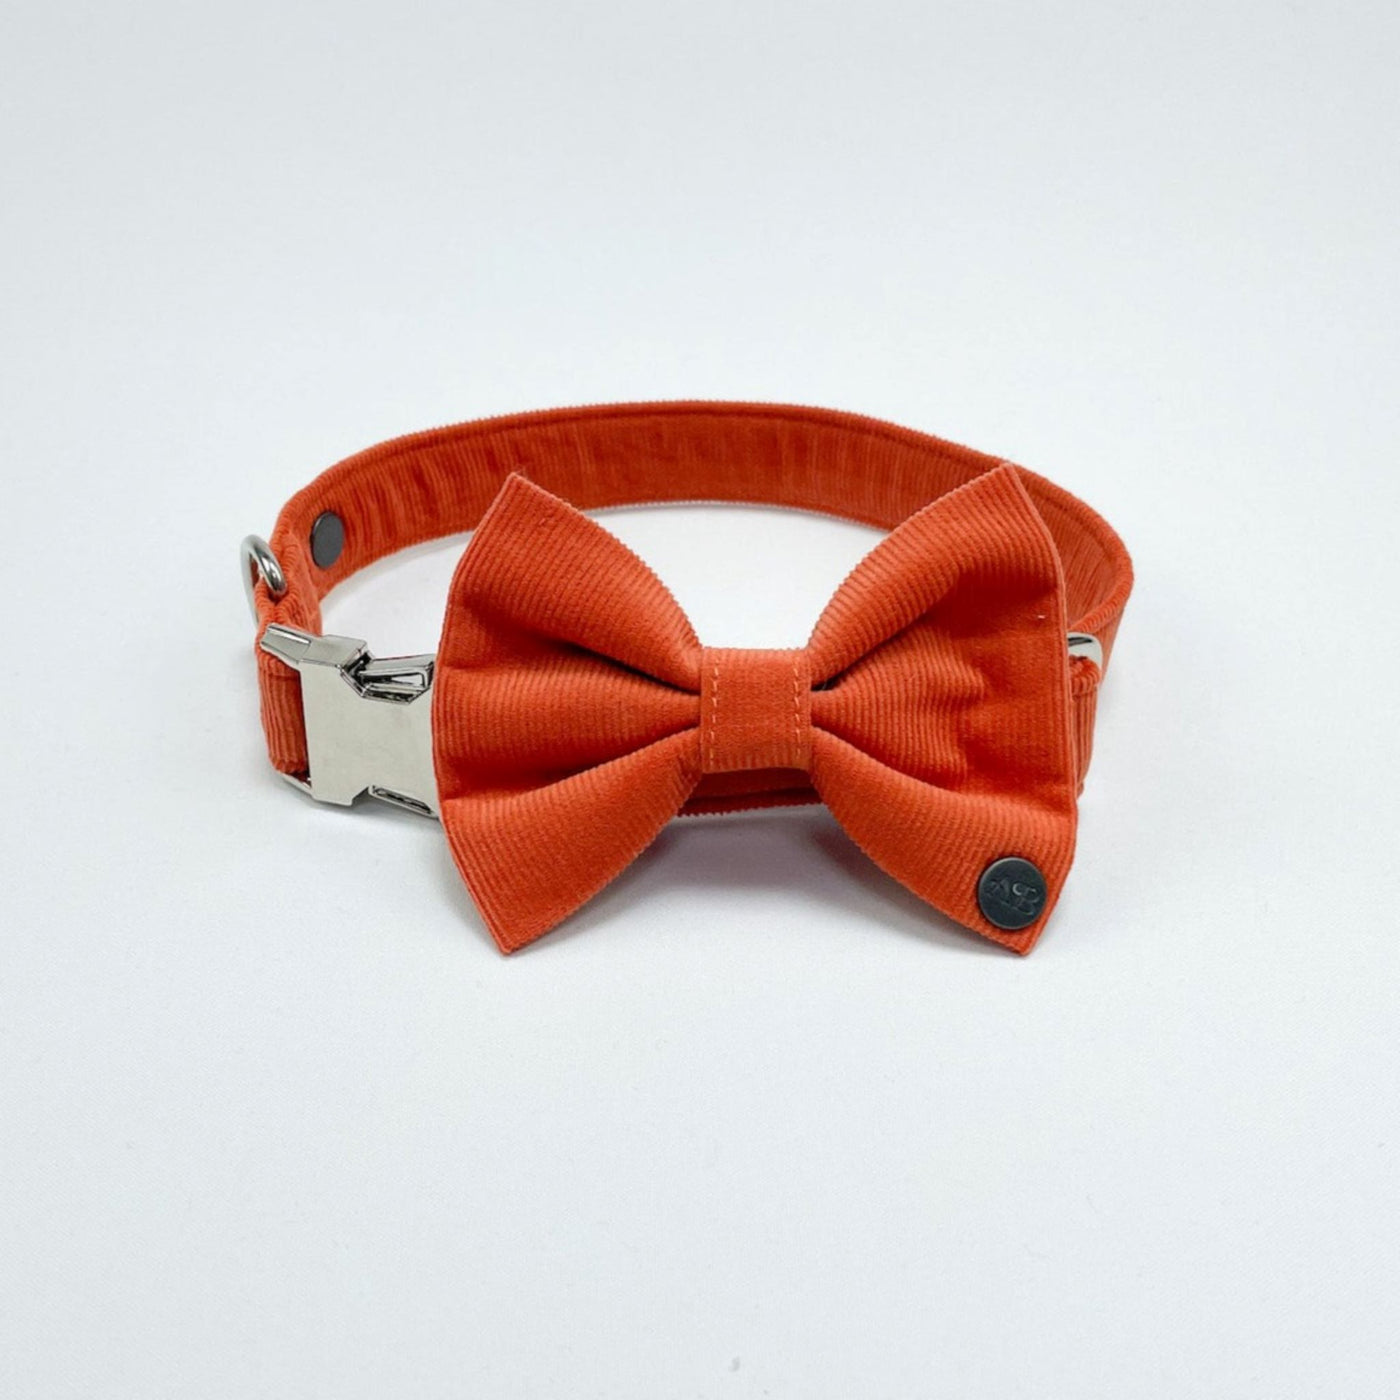 Orange Corduroy Dog Bow Tie with matching collar, buckle clipped.